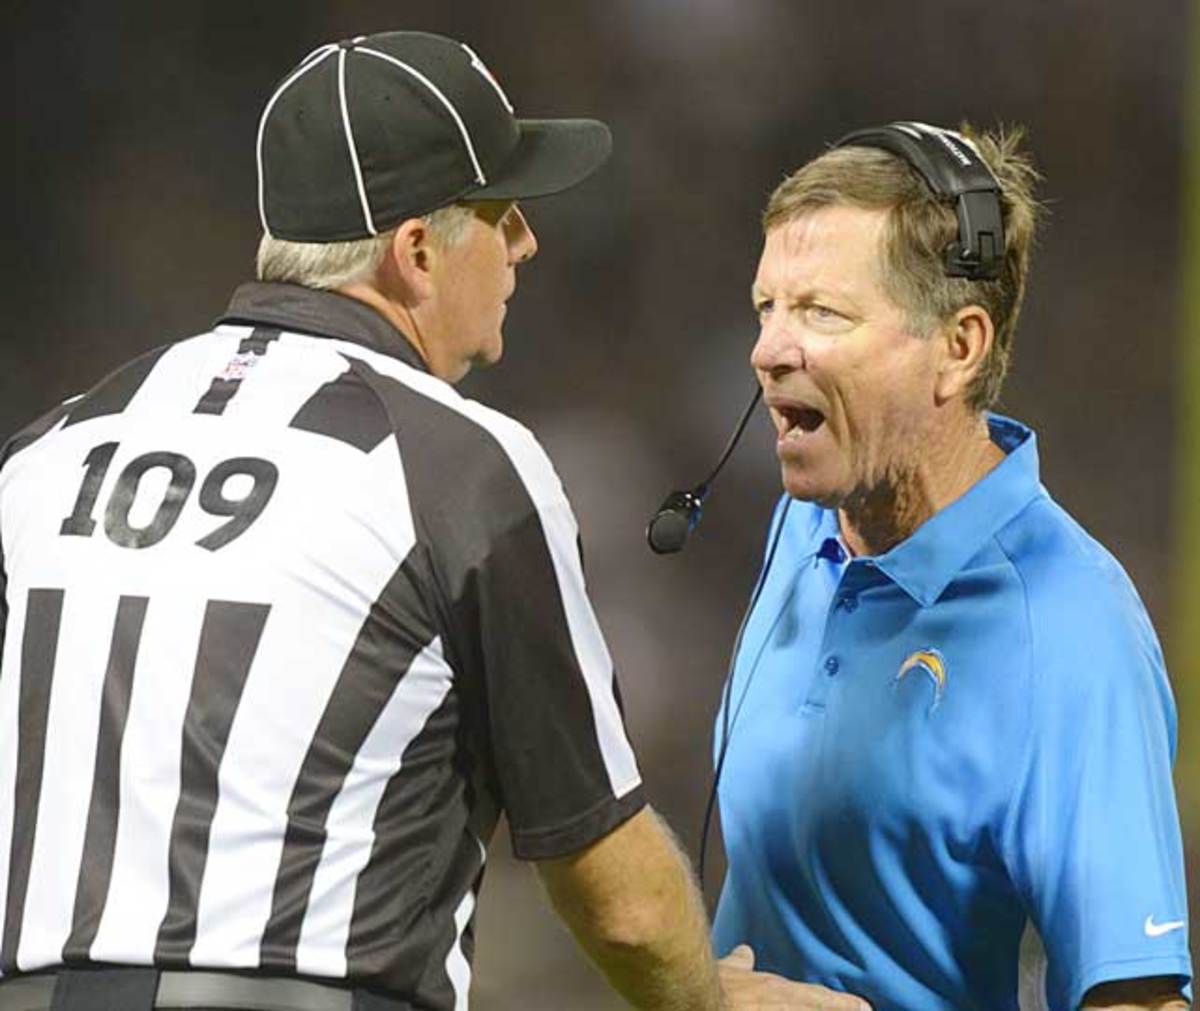 Replacement Referees - Daily Snark